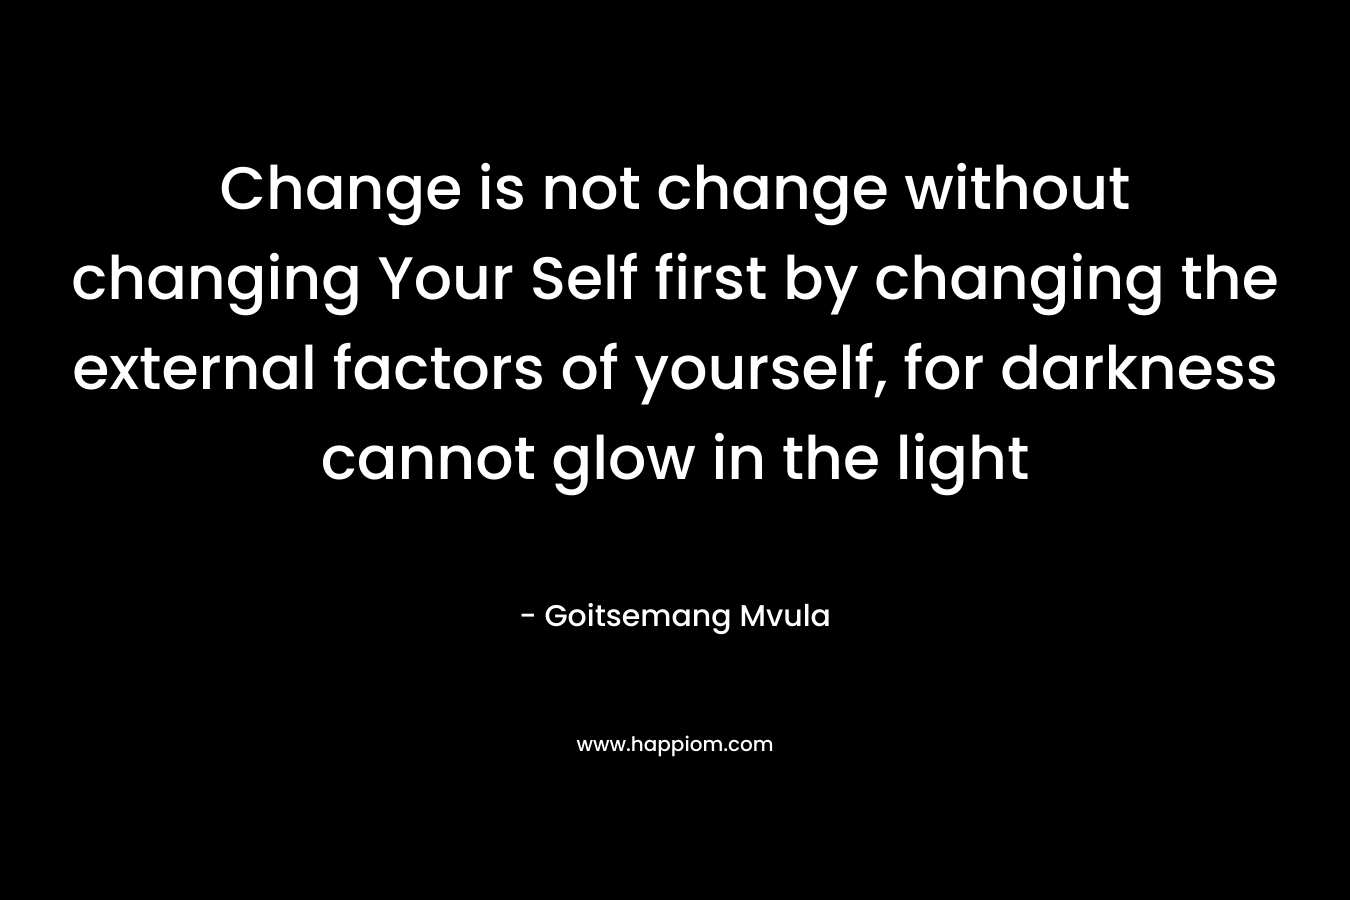 Change is not change without changing Your Self first by changing the external factors of yourself, for darkness cannot glow in the light